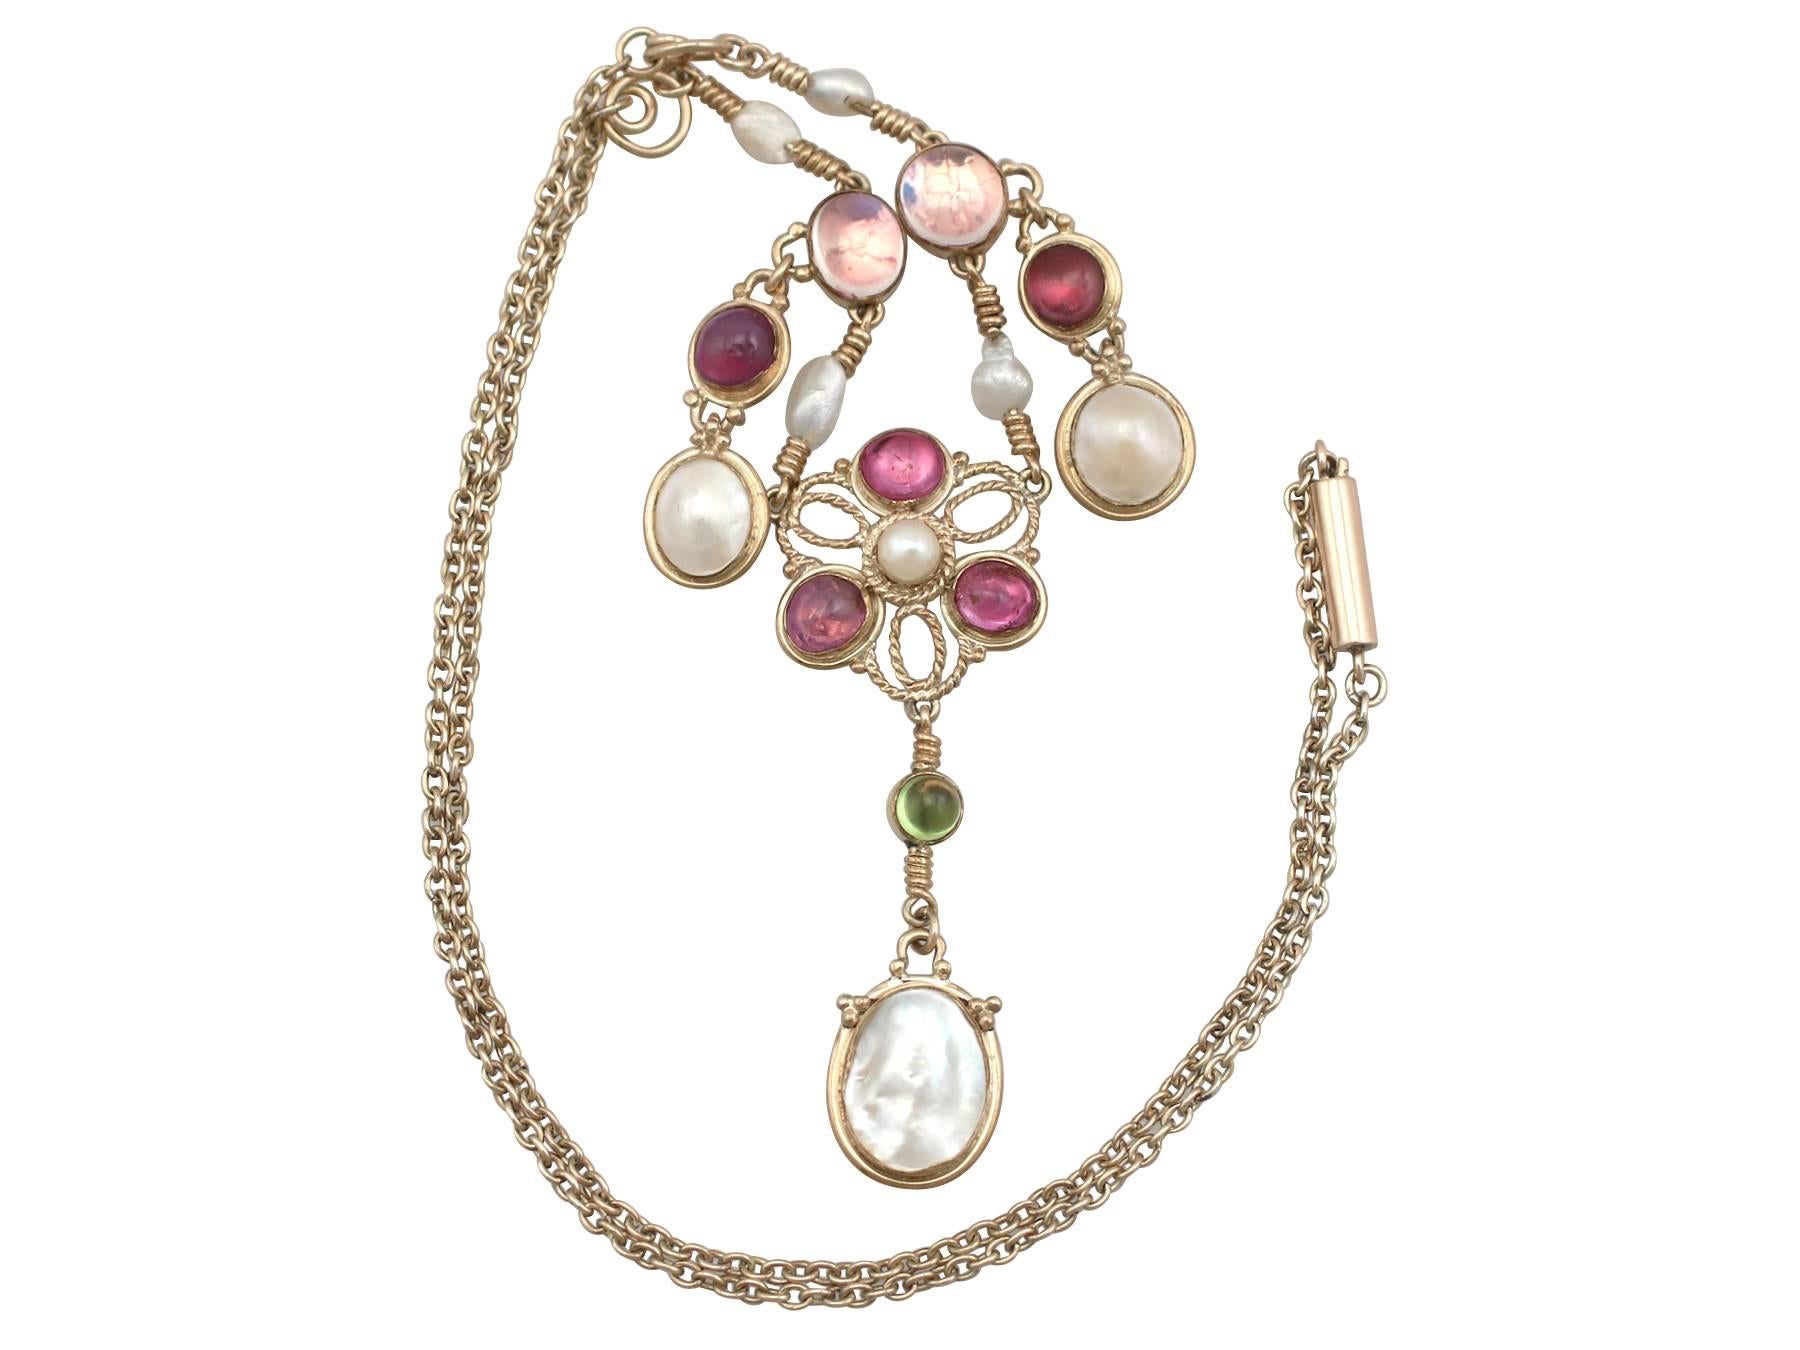 An exceptional antique pearl and 3.32 carat amethyst, peridot and moonstone, 9 karat yellow gold necklace; part of our diverse antique jewelry collections

This stunning, fine and impressive pearl and gemstone necklace has been crafted in 9 k yellow